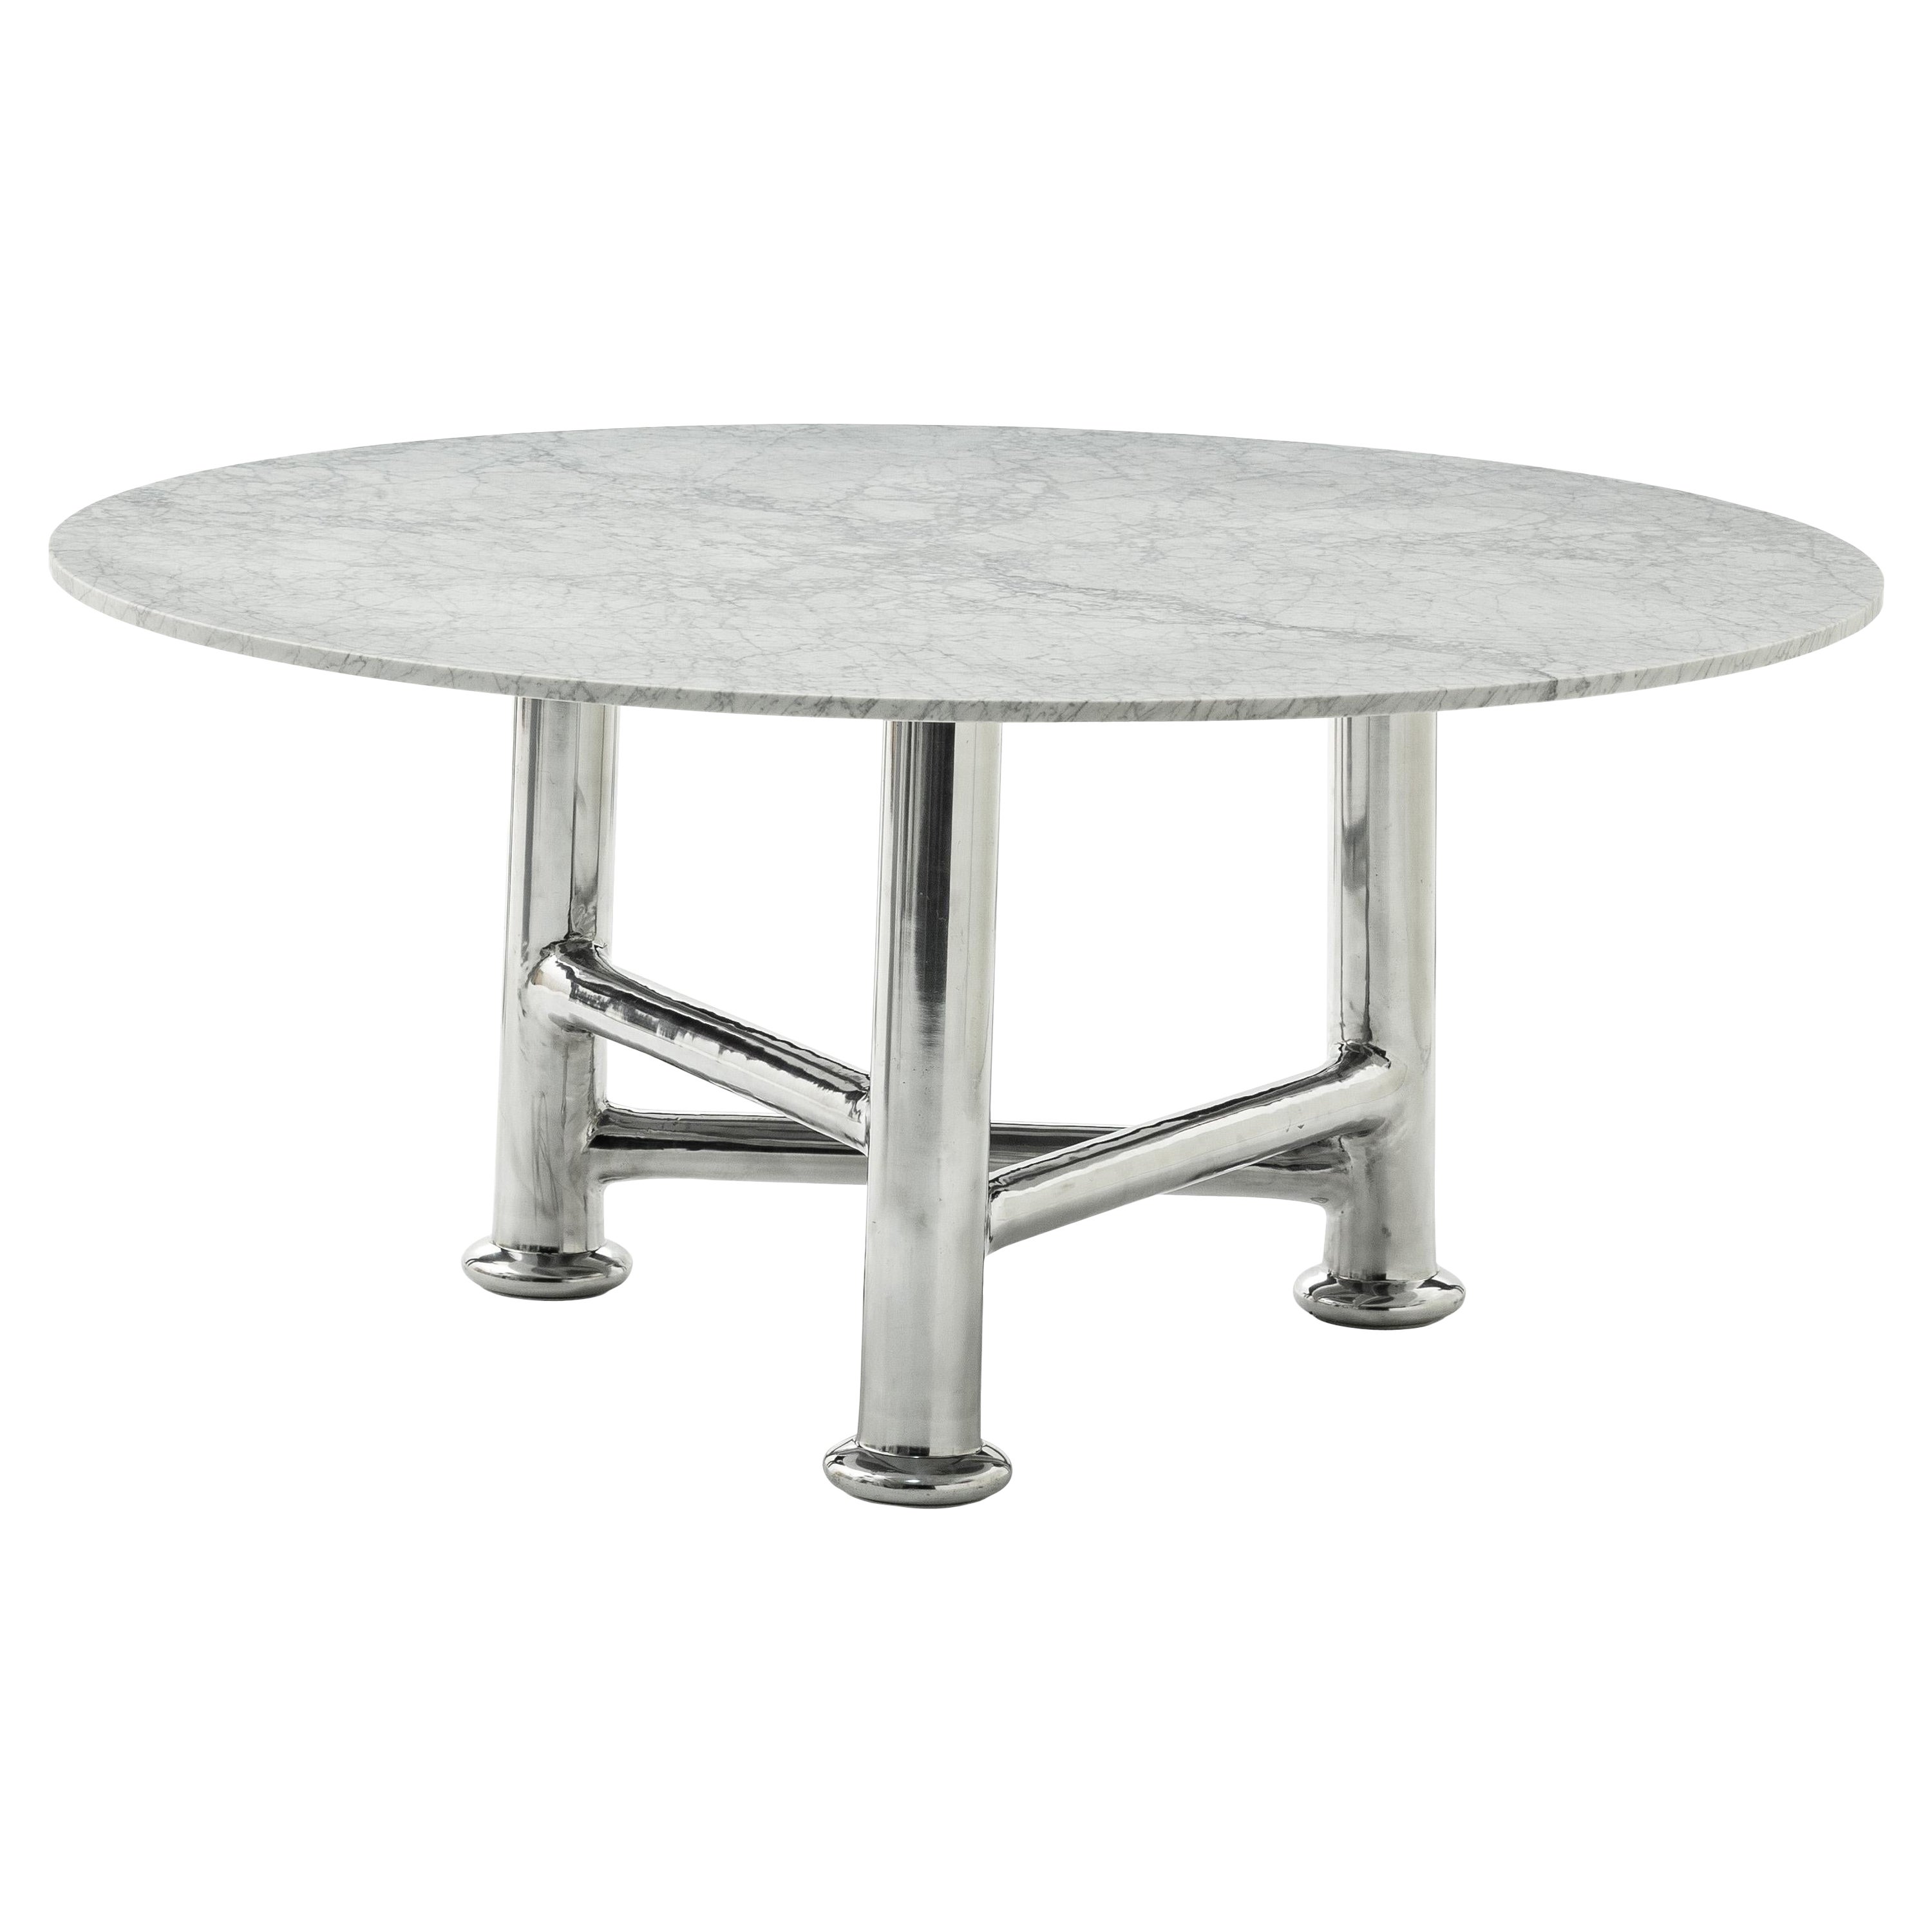 Gervasoni Next 36 in Cast Aluminium Table with Carrara Marble Top by Paola Navon